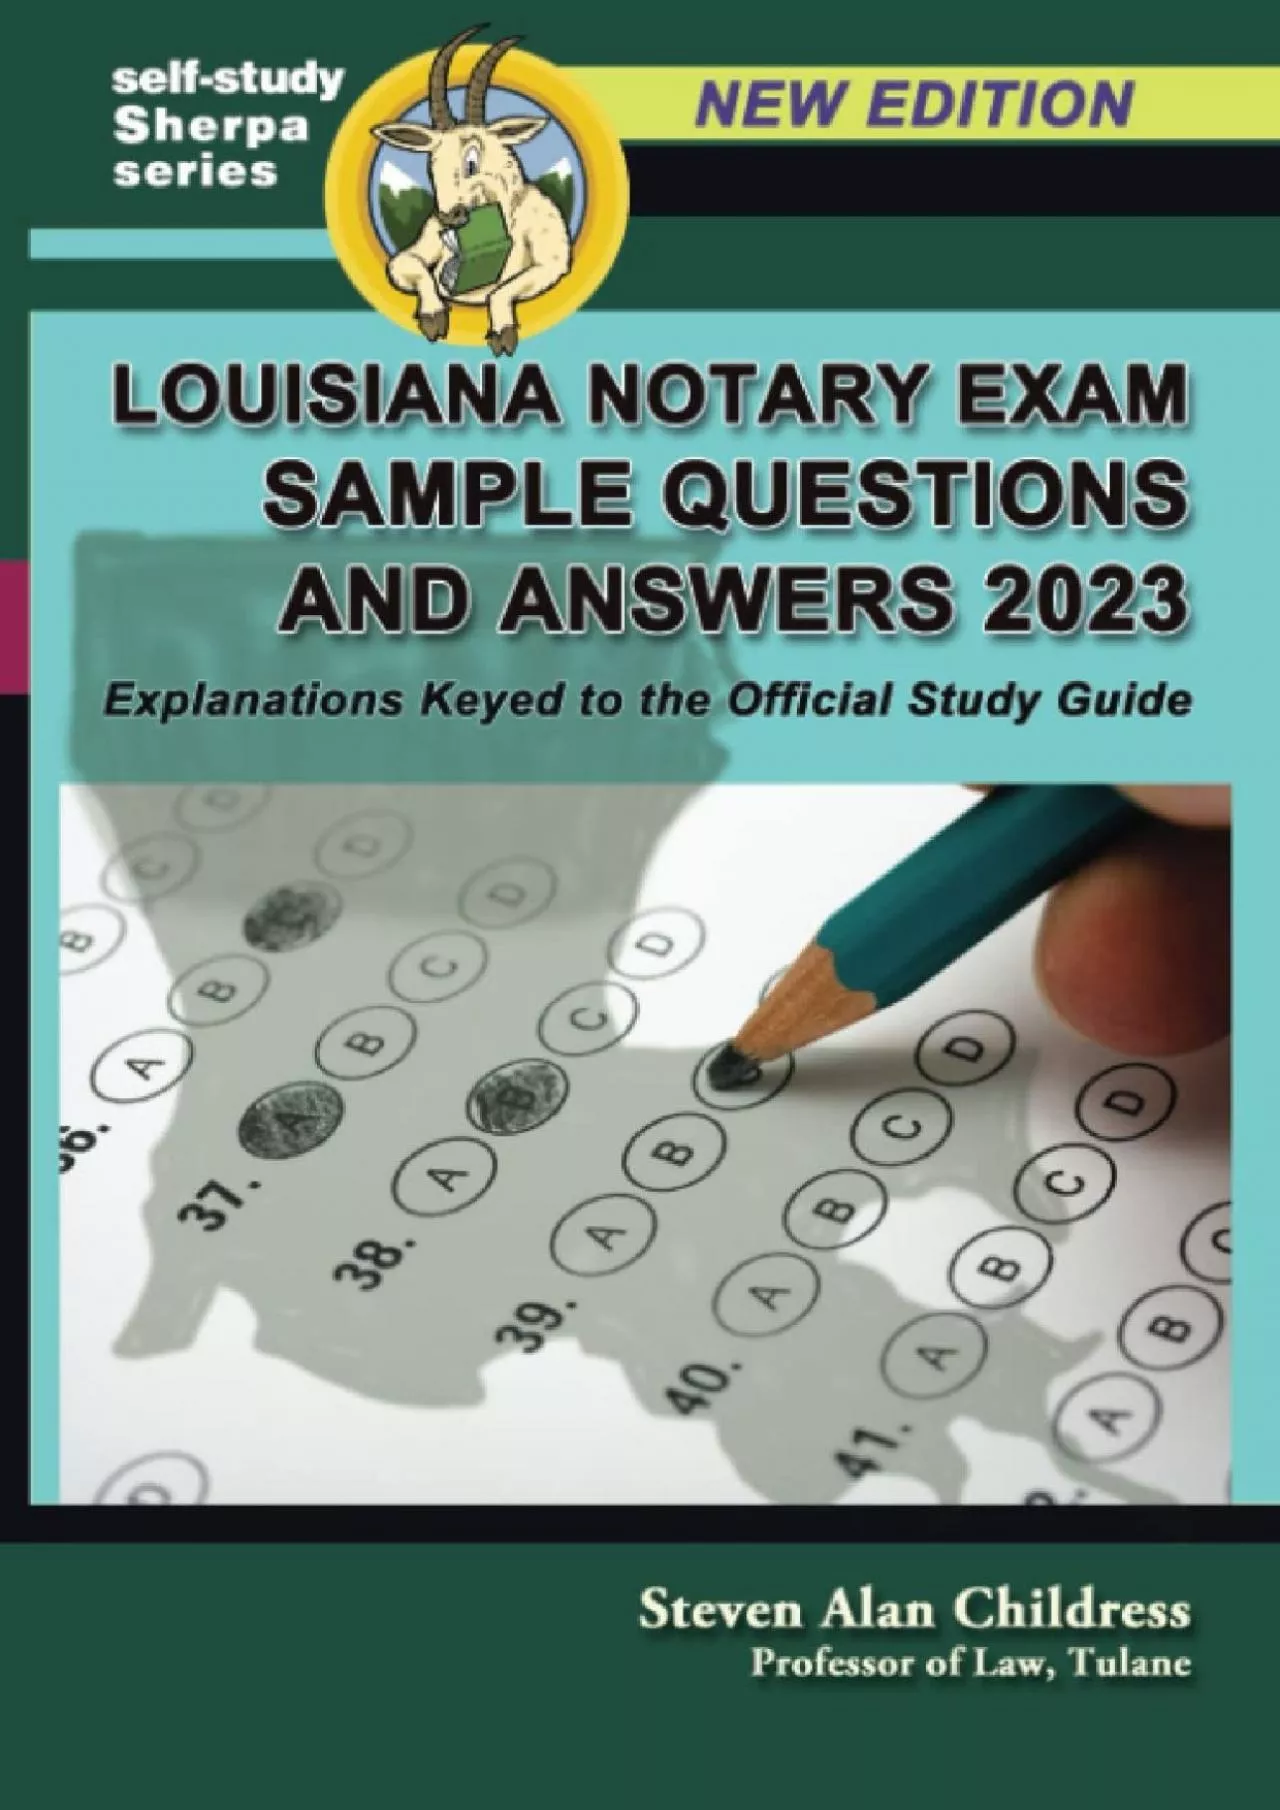 [EBOOK] Louisiana Notary Exam Sample Questions and Answers 2023: Explanations Keyed to